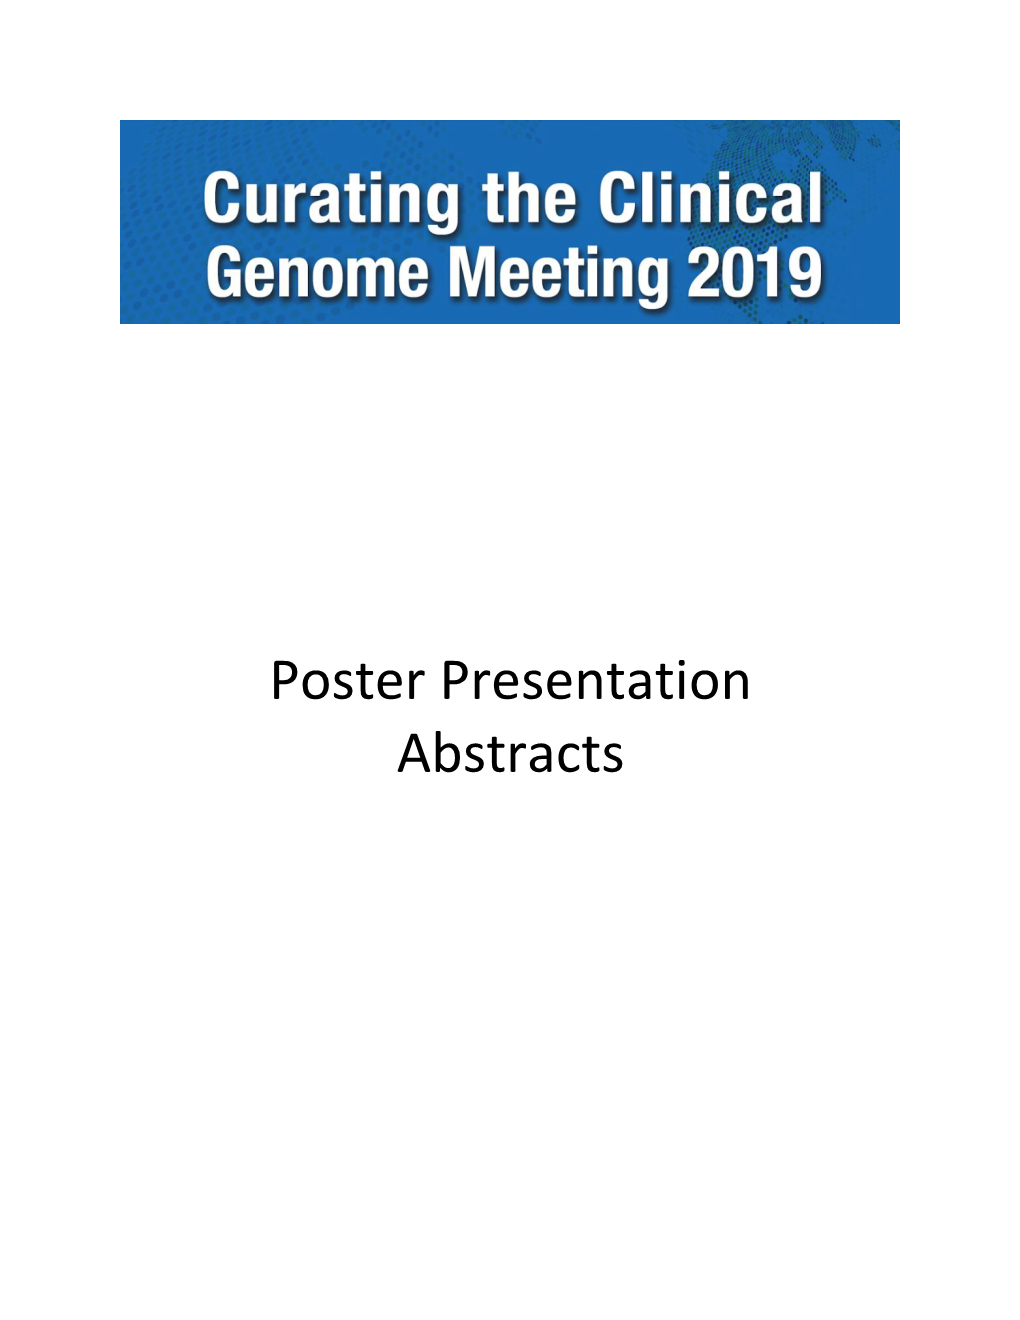 Abstracts Selected for Poster Presentations